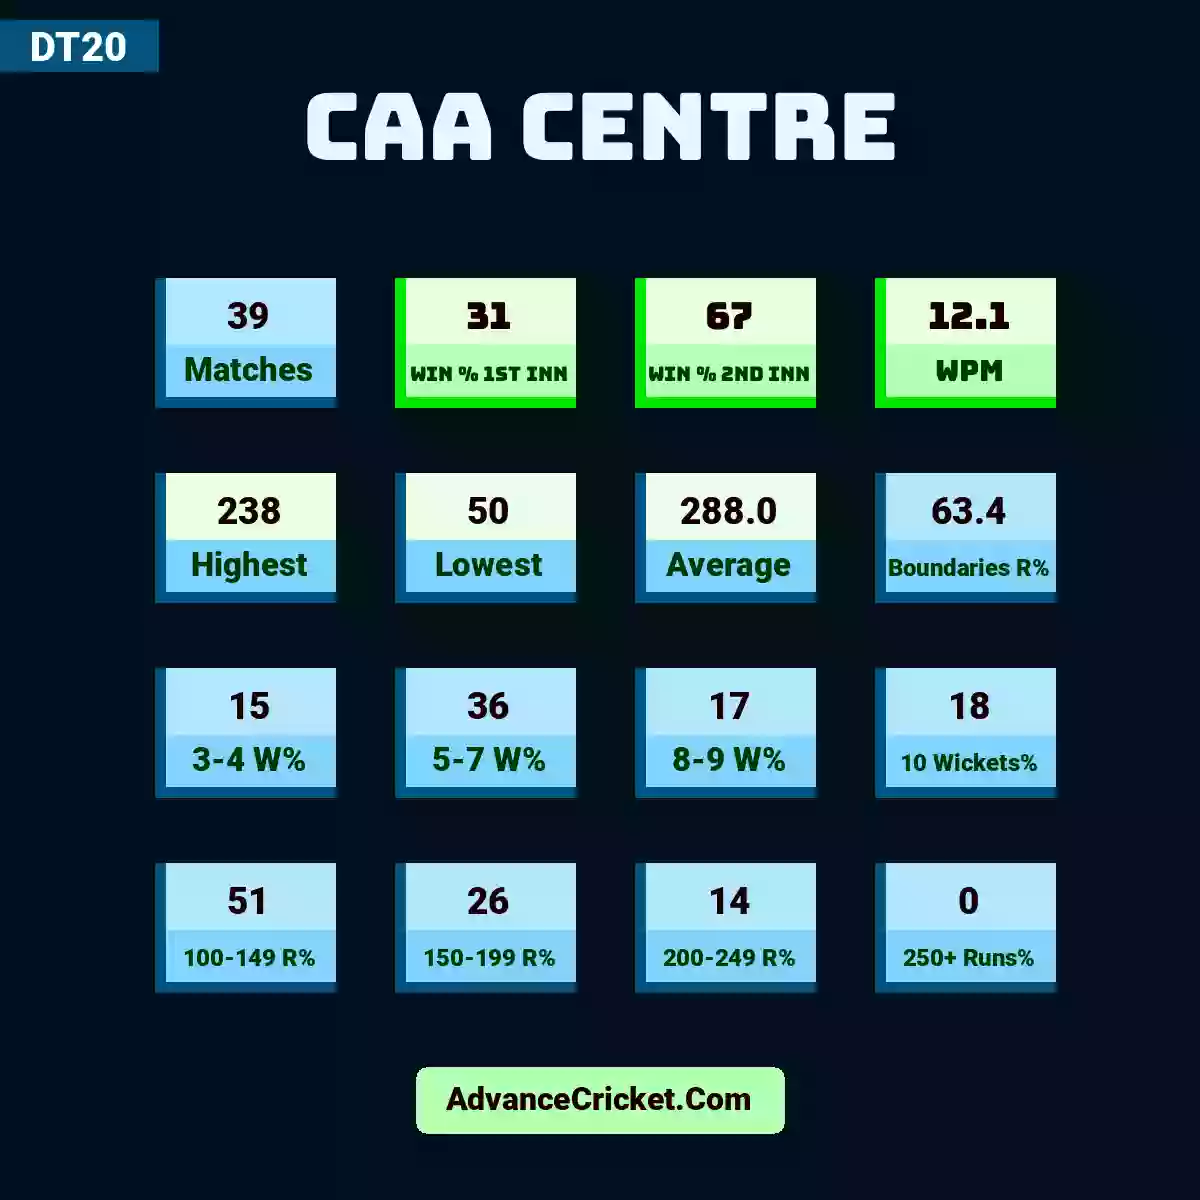 Image showing CAA Centre with Matches: 39, Win % 1st Inn: 31, Win % 2nd Inn: 67, WPM: 12.1, Highest: 238, Lowest: 50, Average: 288.0, Boundaries R%: 63.4, 3-4 W%: 15, 5-7 W%: 36, 8-9 W%: 17, 10 Wickets%: 18, 100-149 R%: 51, 150-199 R%: 26, 200-249 R%: 14, 250+ Runs%: 0.